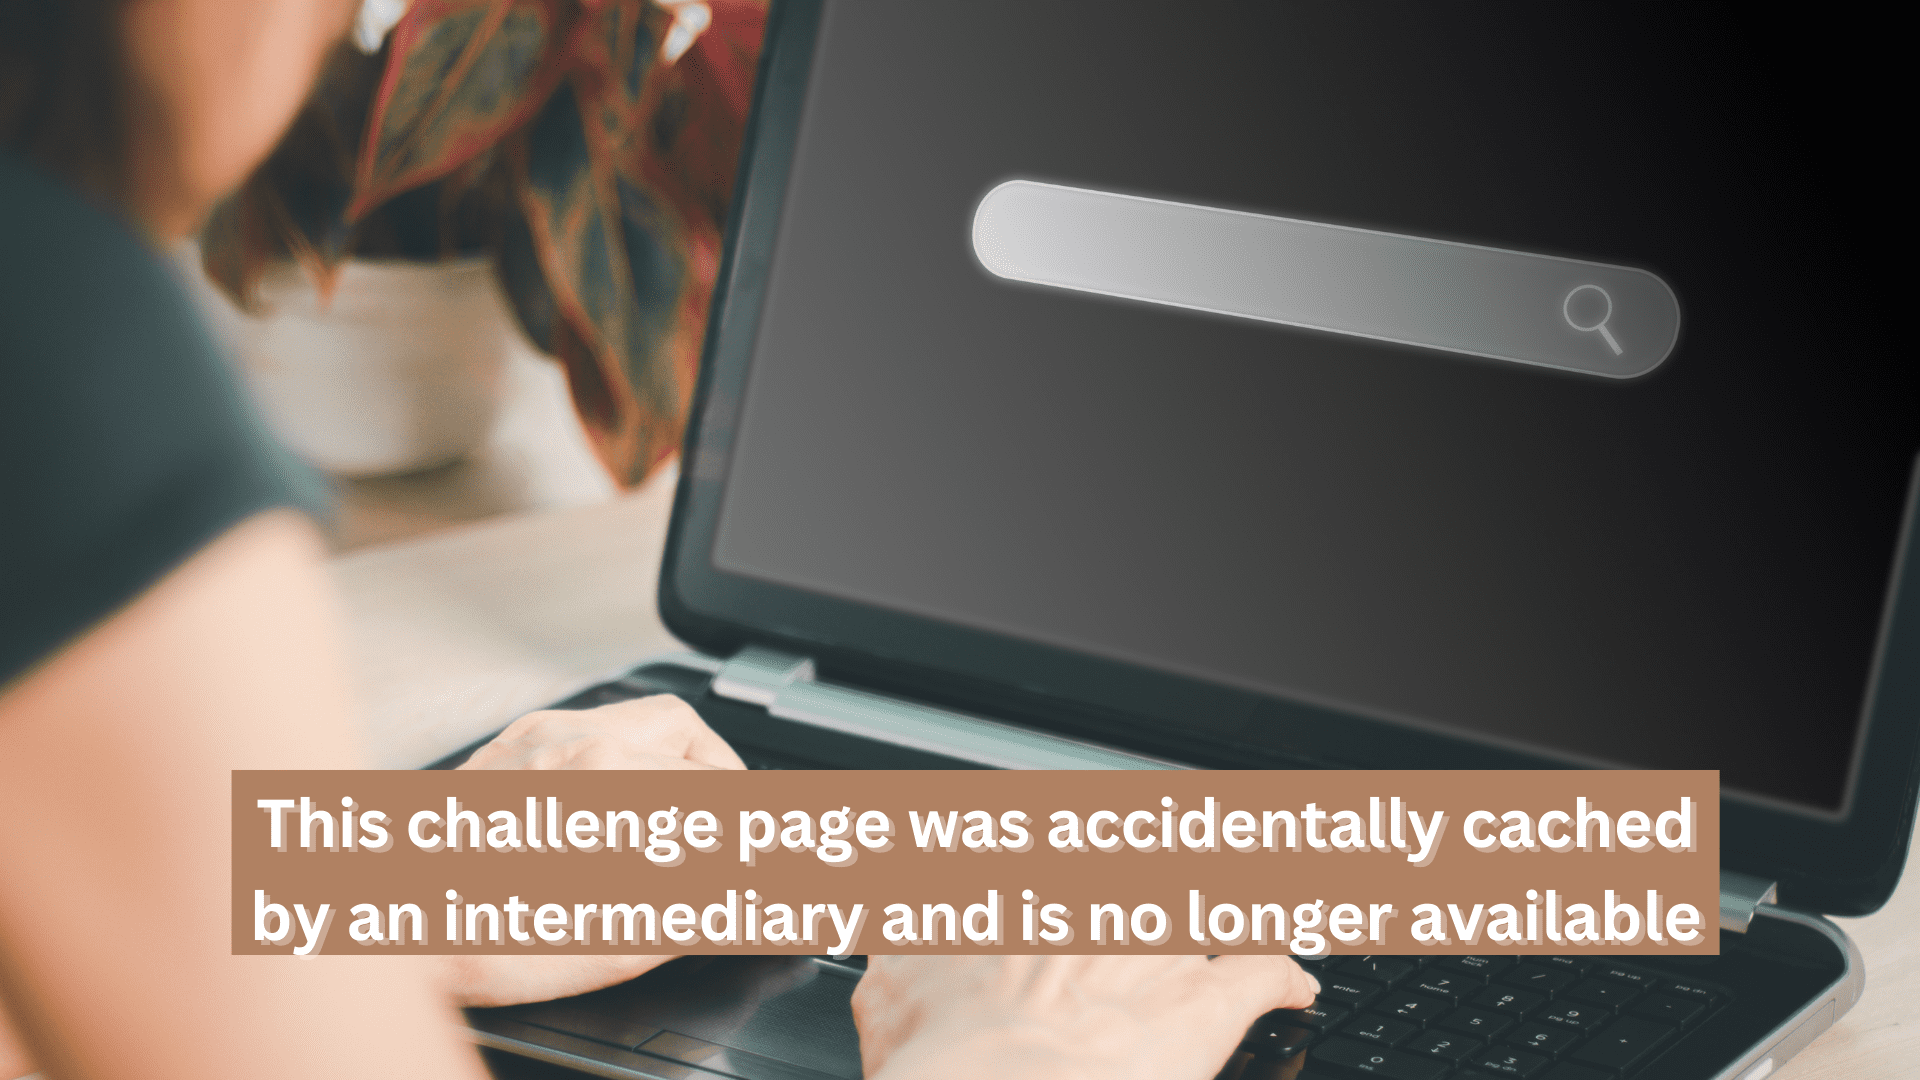 fixed :This challenge page was accidentally cached by an intermediary and is no longer available